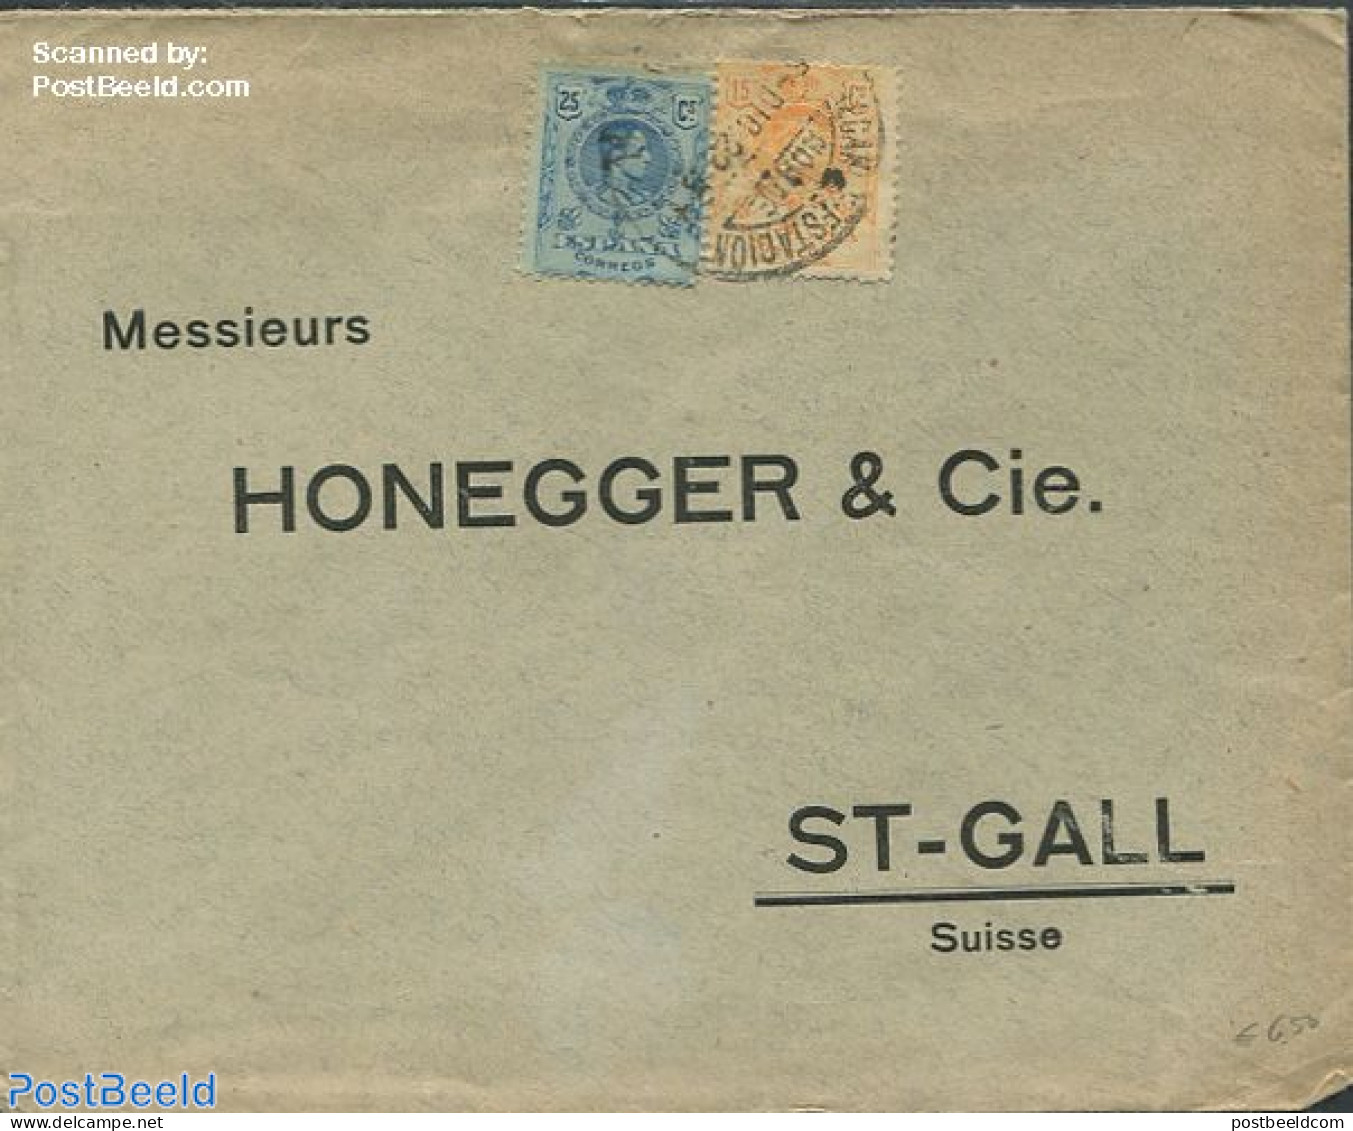 Spain 1923 Envelope To St.Gall, Postal History - Covers & Documents